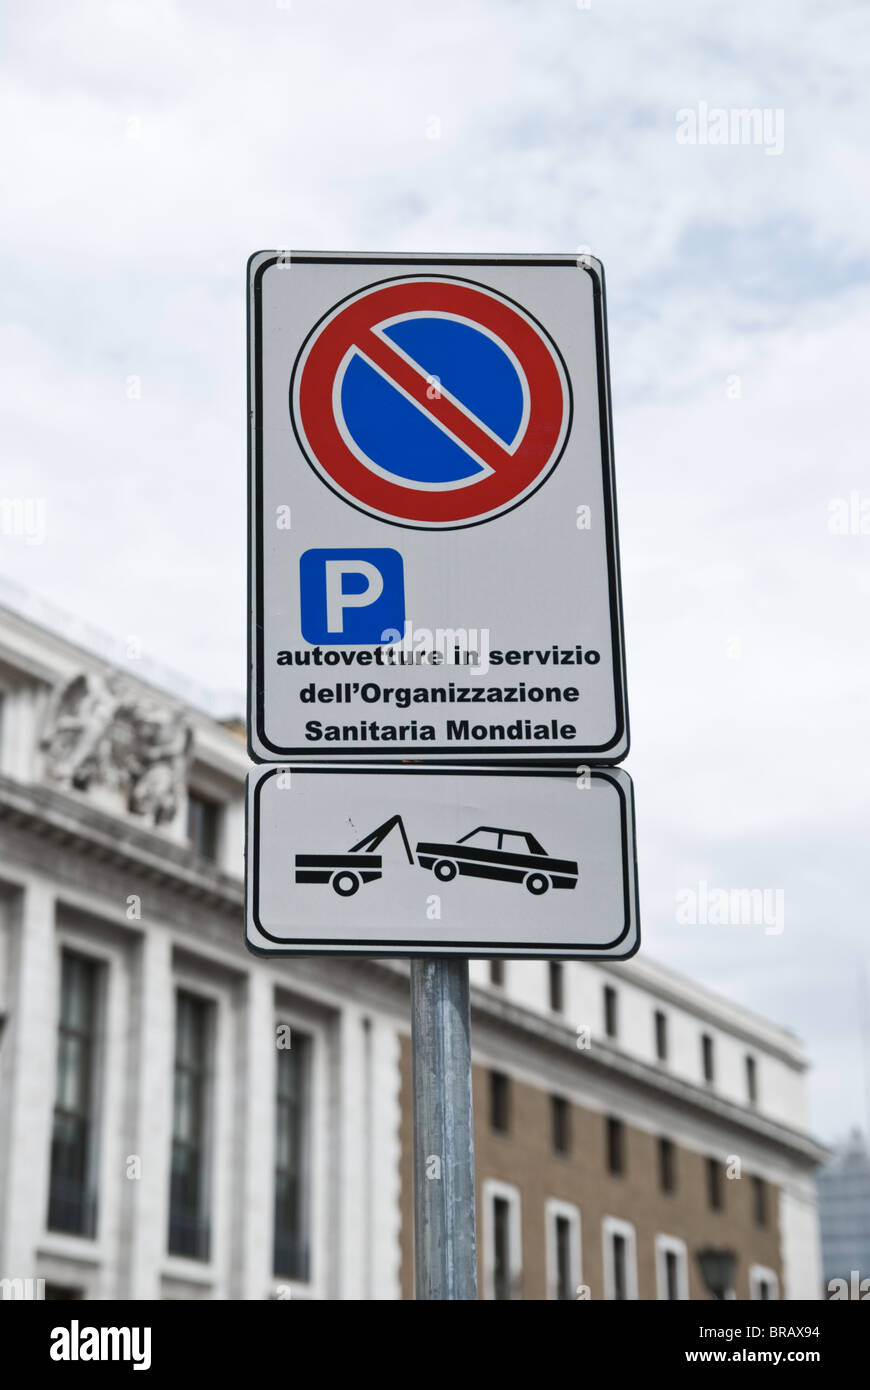 https://c8.alamy.com/comp/BRAX94/italian-no-parking-sign-cars-will-be-towed-away-permit-parking-only-BRAX94.jpg